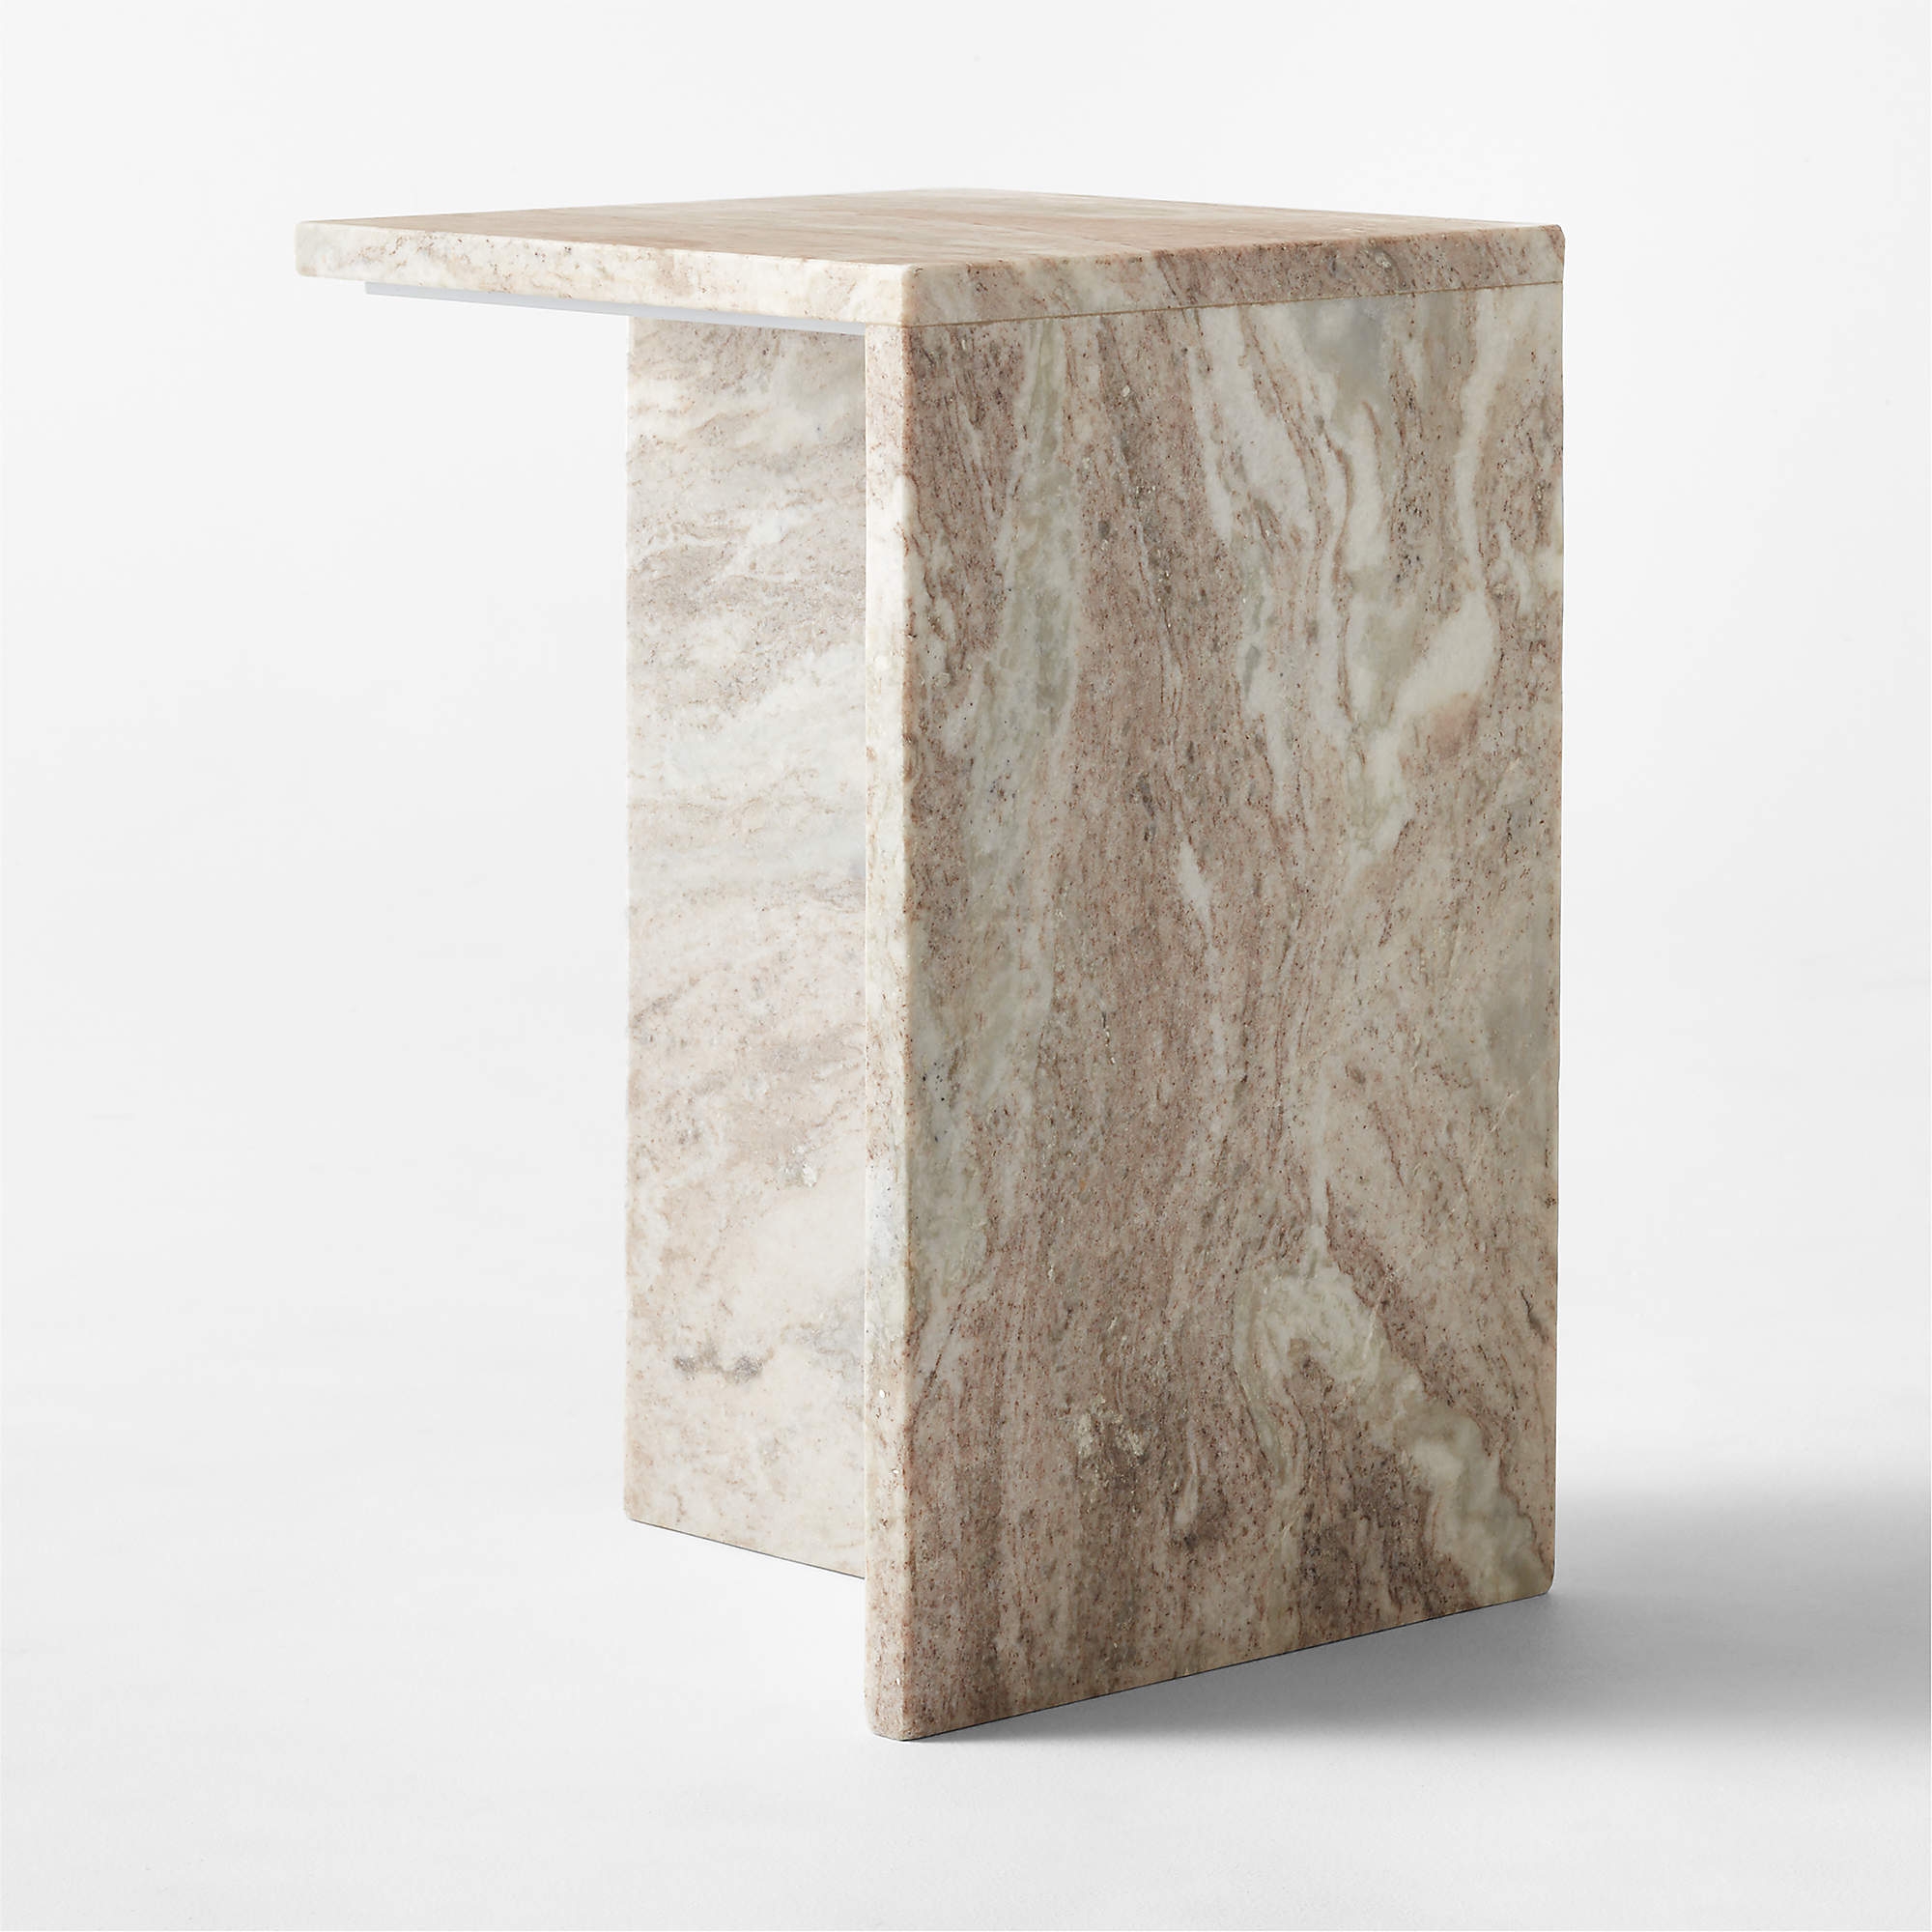 T Marble Side Table, Tall, Restock in early December - Image 4